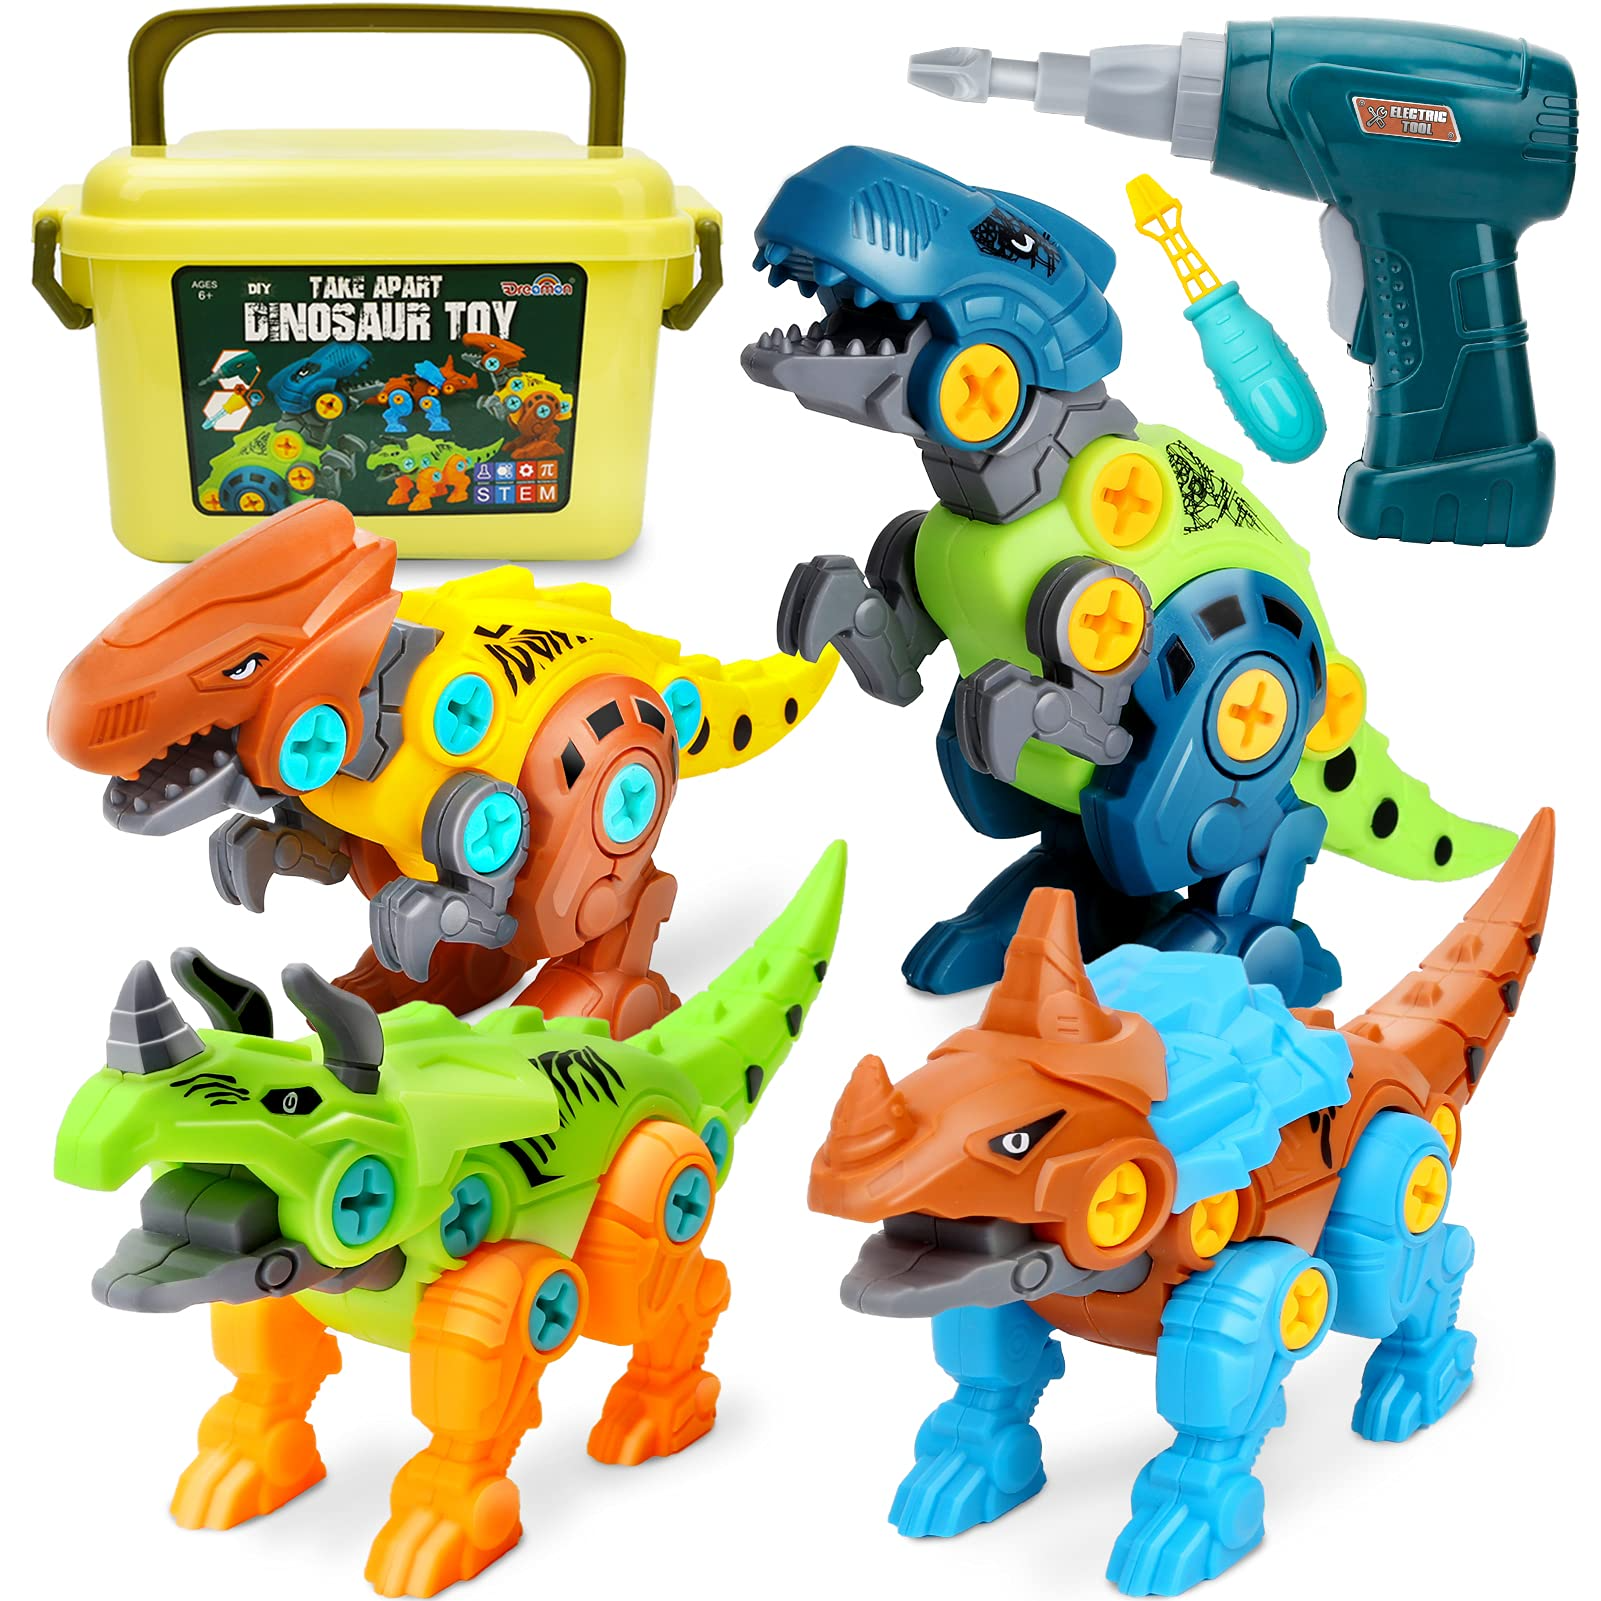 VNVDFLM 3 Pcs Take Apart Dinosaur Toys for Kids Age 3 4 5 6 7 L-r3, Red, Green, Brown Building Toy Set Learning Gifts for Boys and Girls Construction Play Kit Take Apart Toys with Electric Drill